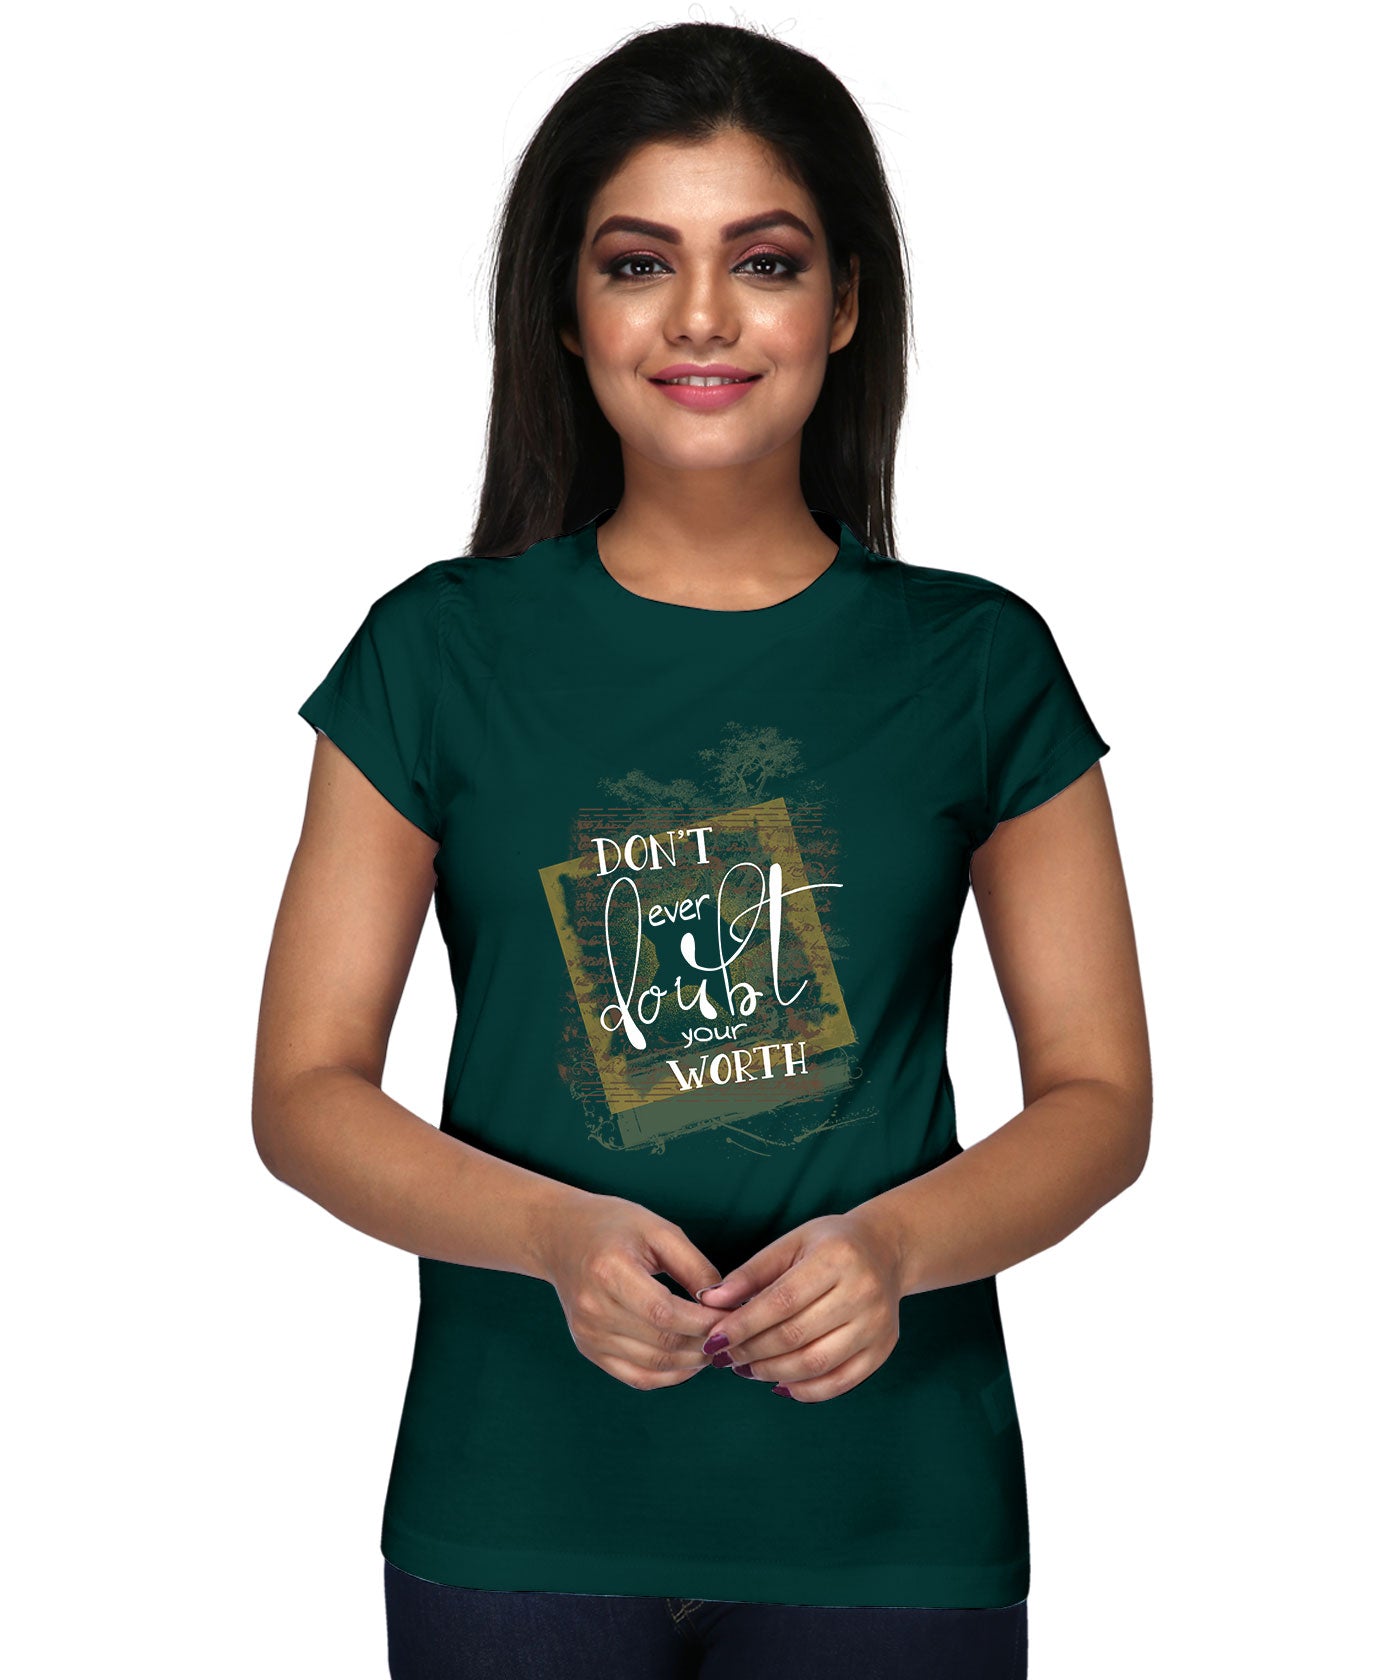 Doubt Your Worth - Block Print Tees for Women - Cactus Green